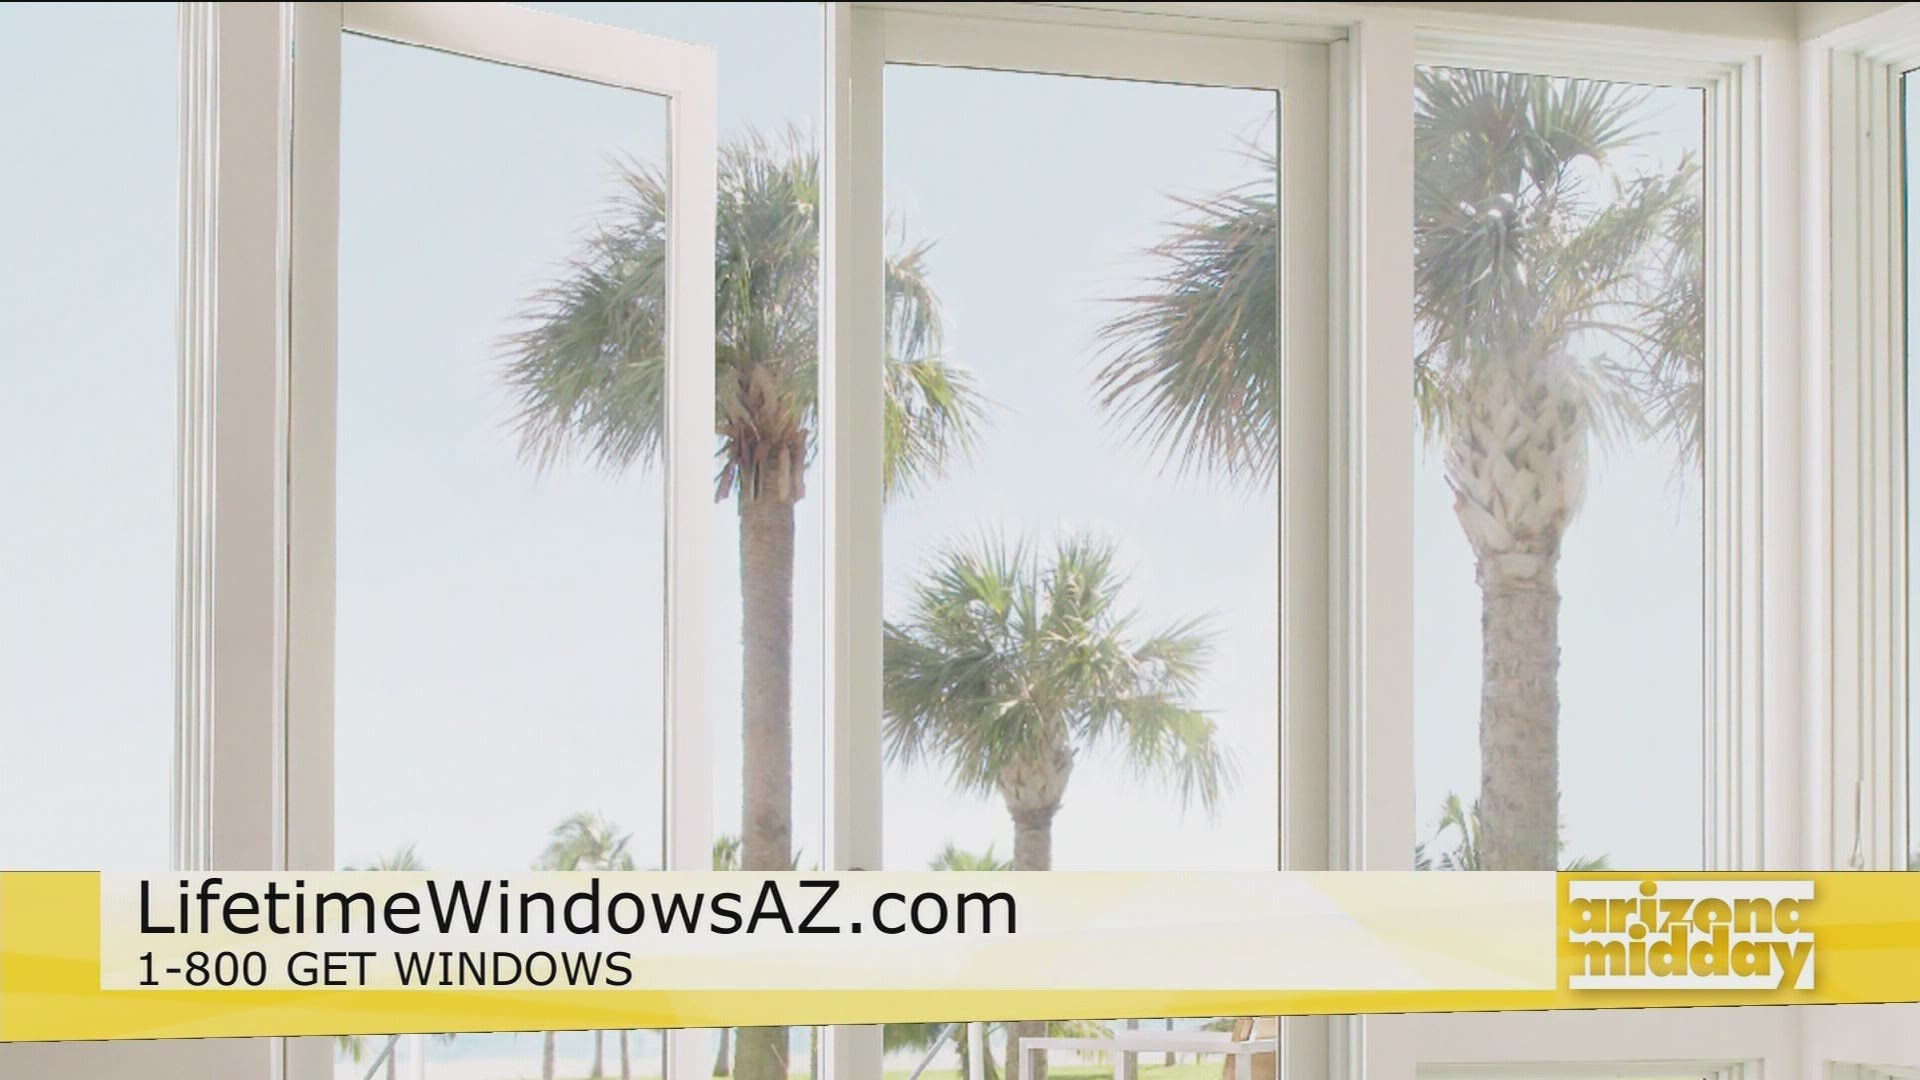 Chris Thomas and Holly Montgomery tell us how Lifetime Windows & Doors help you find the right style and look for your home.